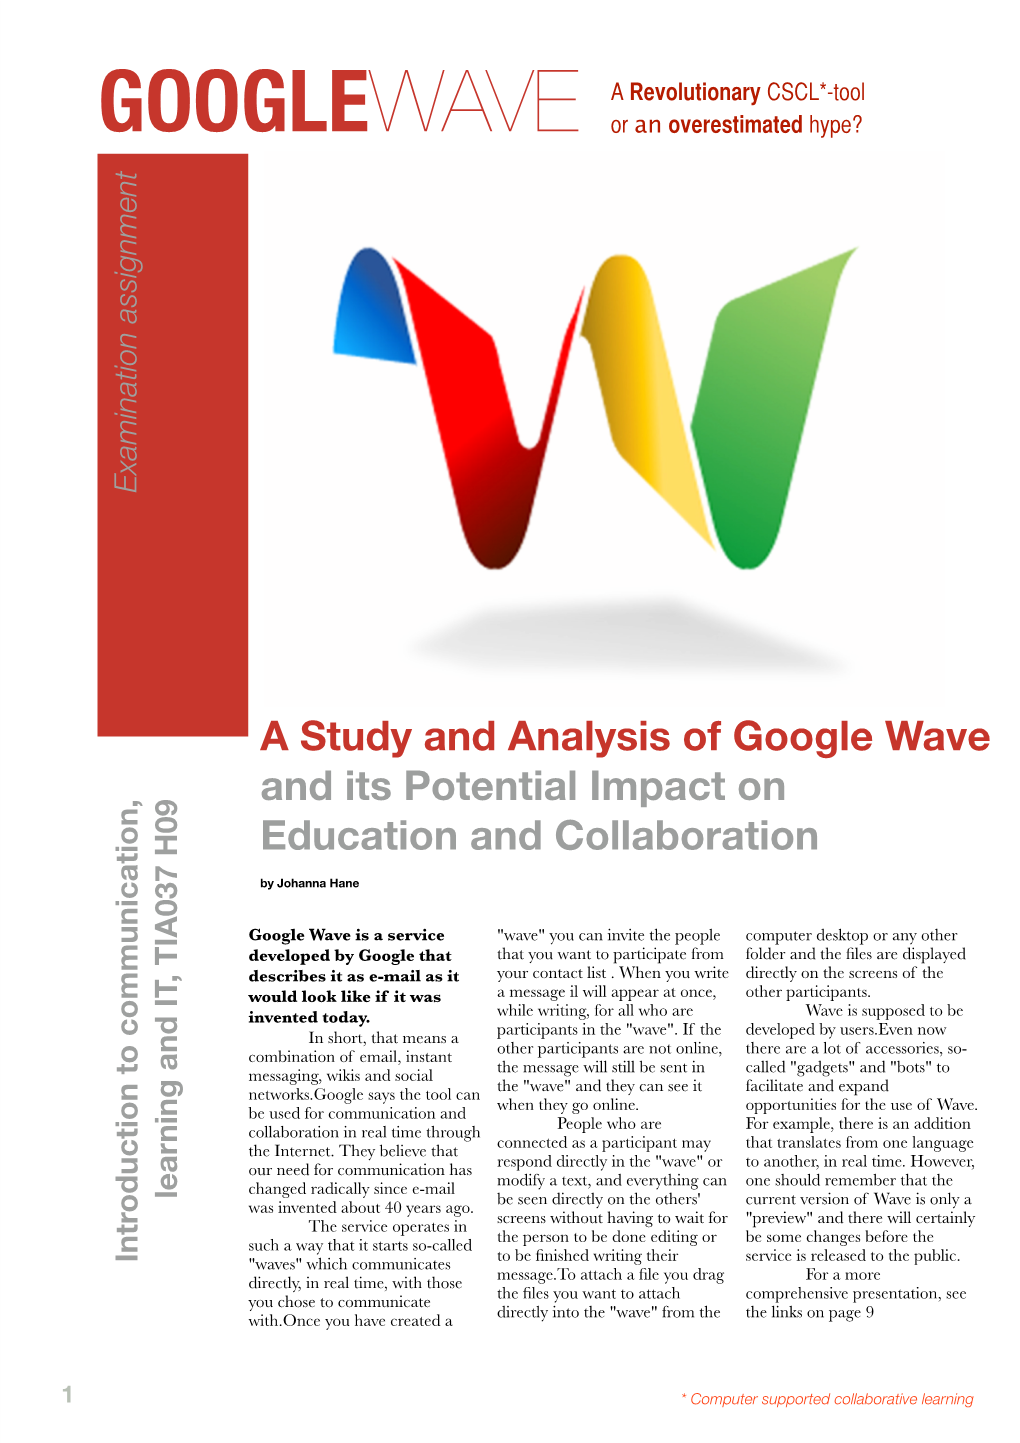 Google Wave and Its Potential Impact on Education and Collaboration